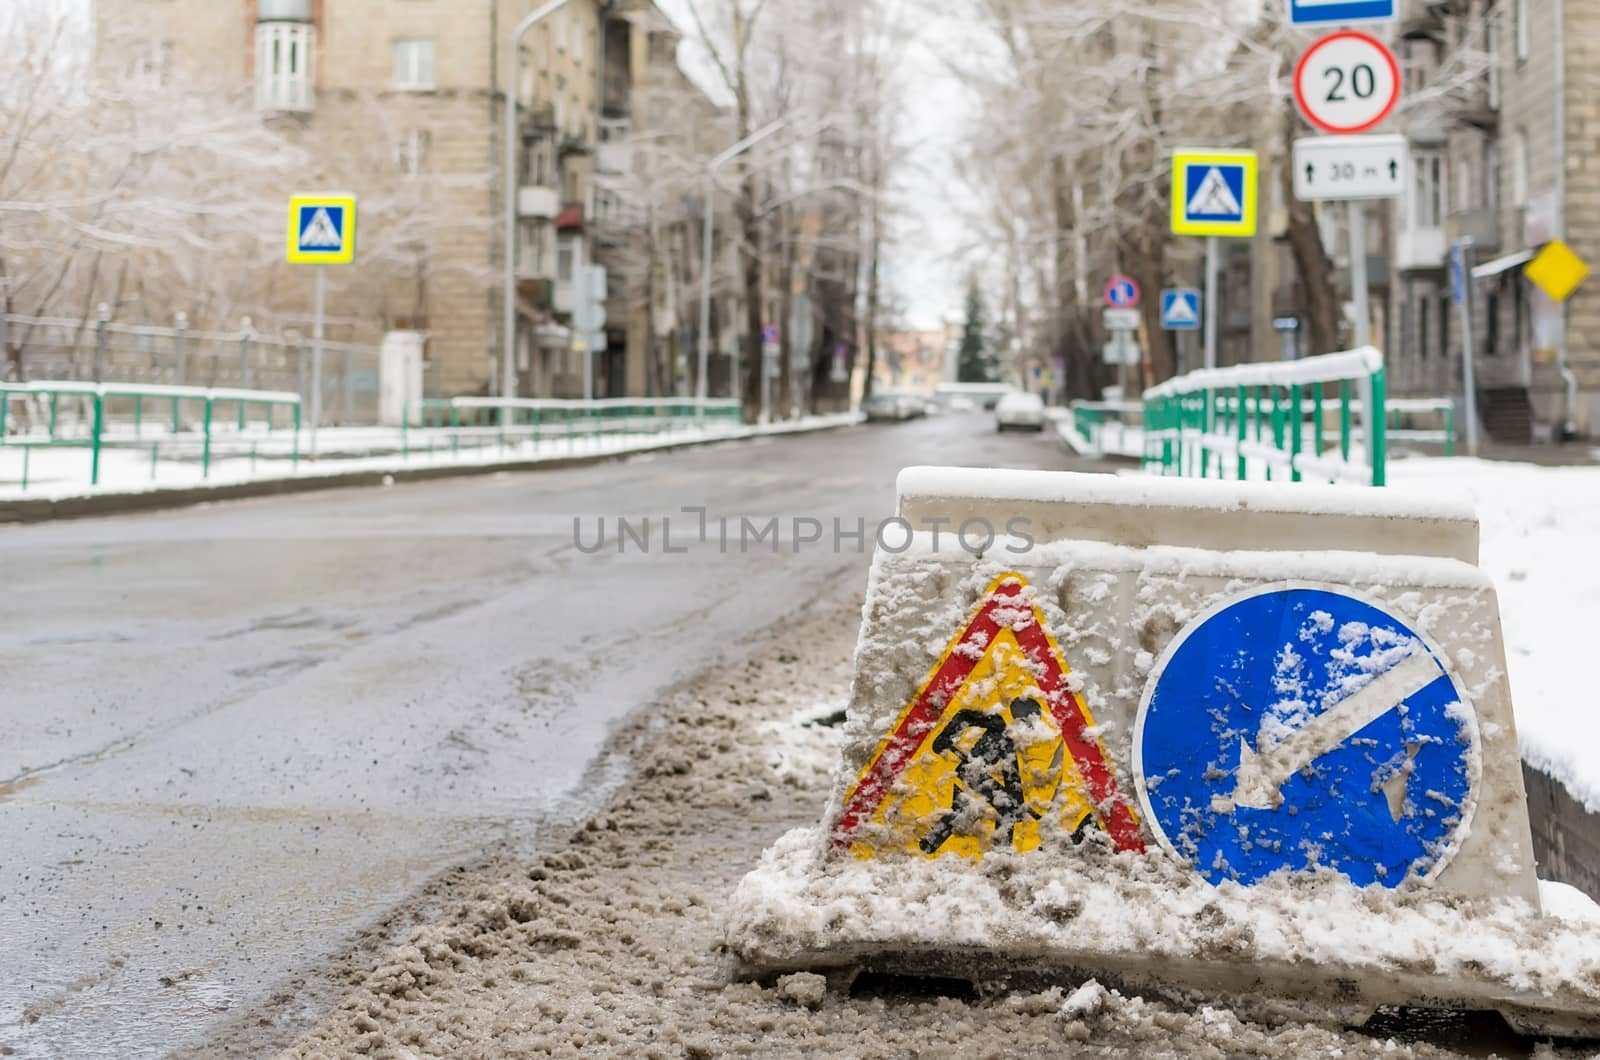 snow-swept road sign, road repair, stands on the roadway of the city street